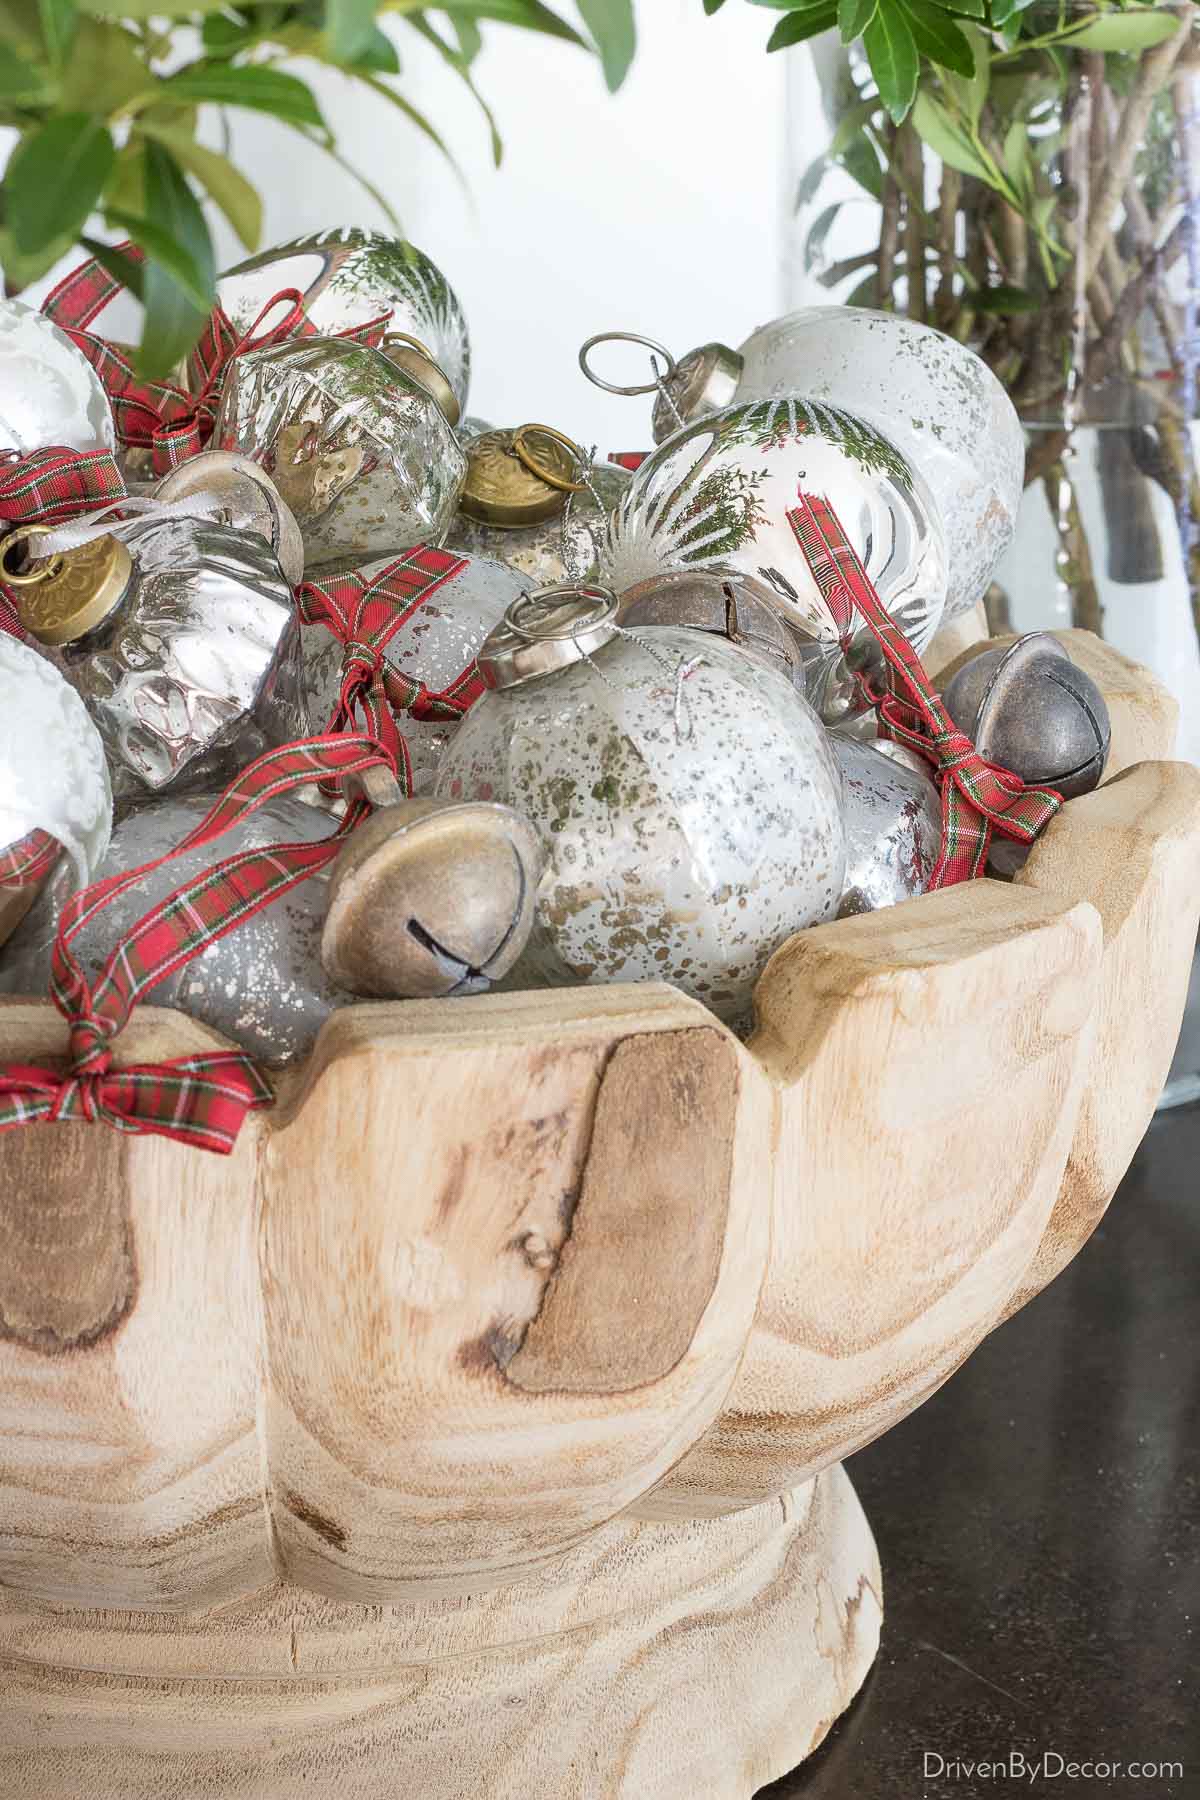 Wood bowl filled with ornaments as console table decor